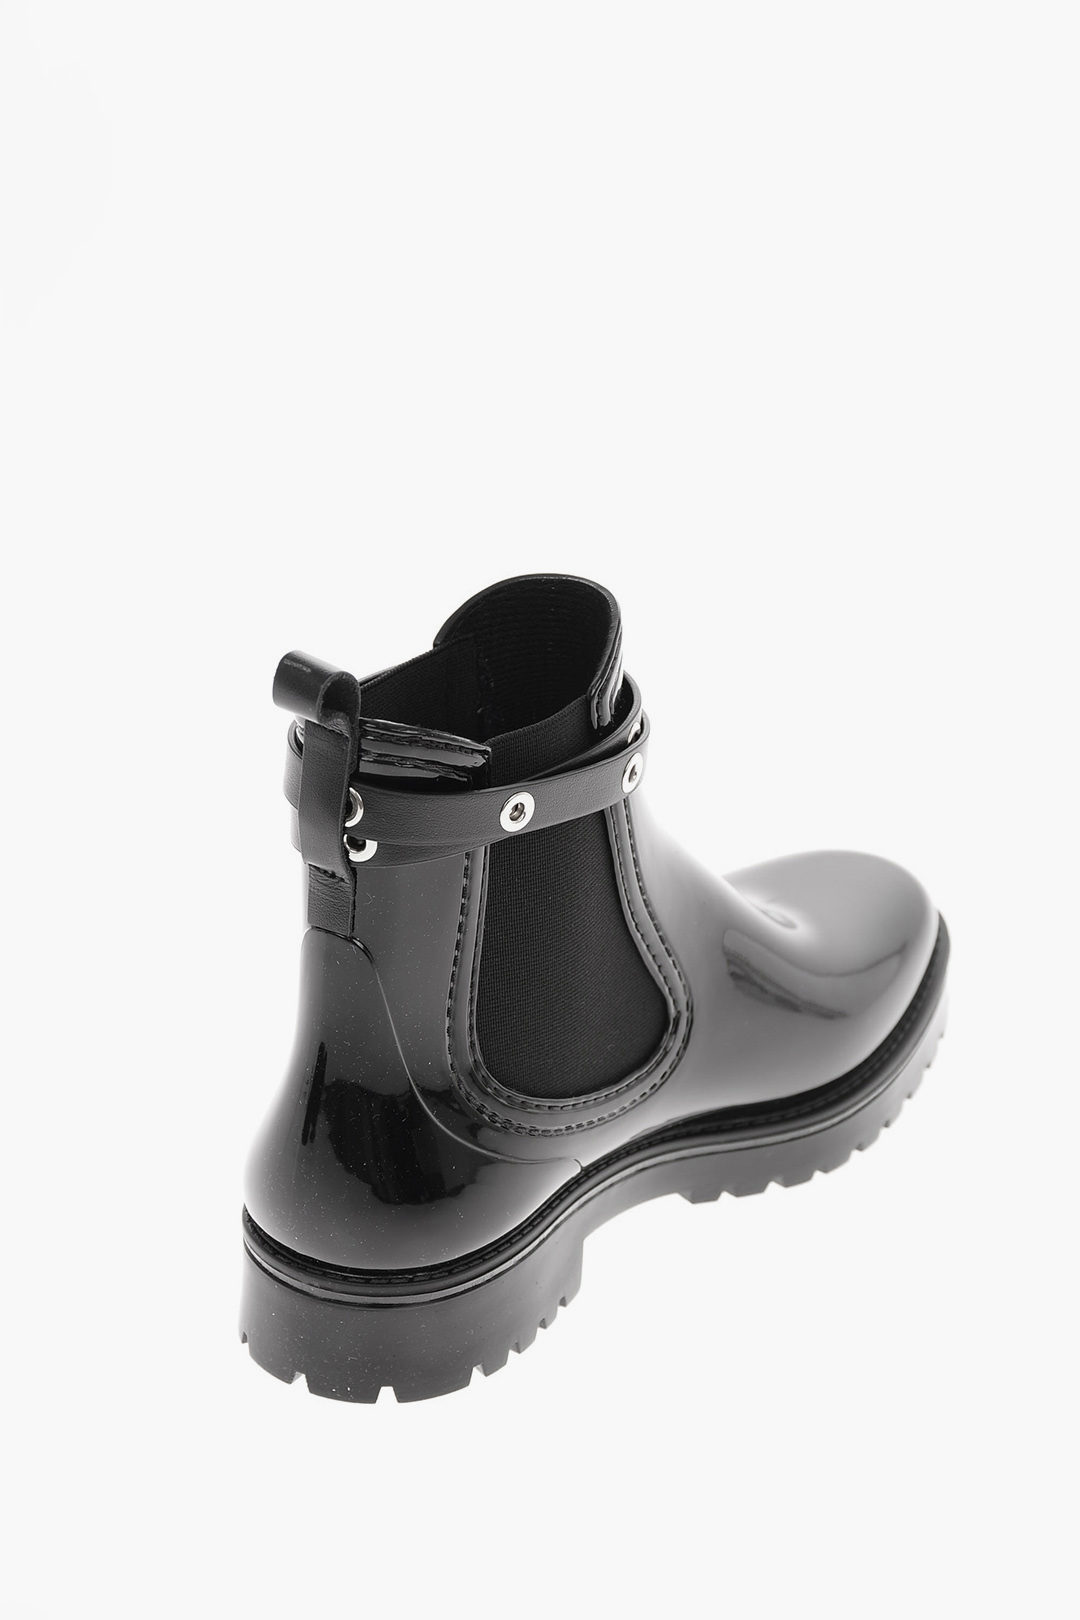 Red Valentino Rubber Chelsea boots women - Glamood Outlet